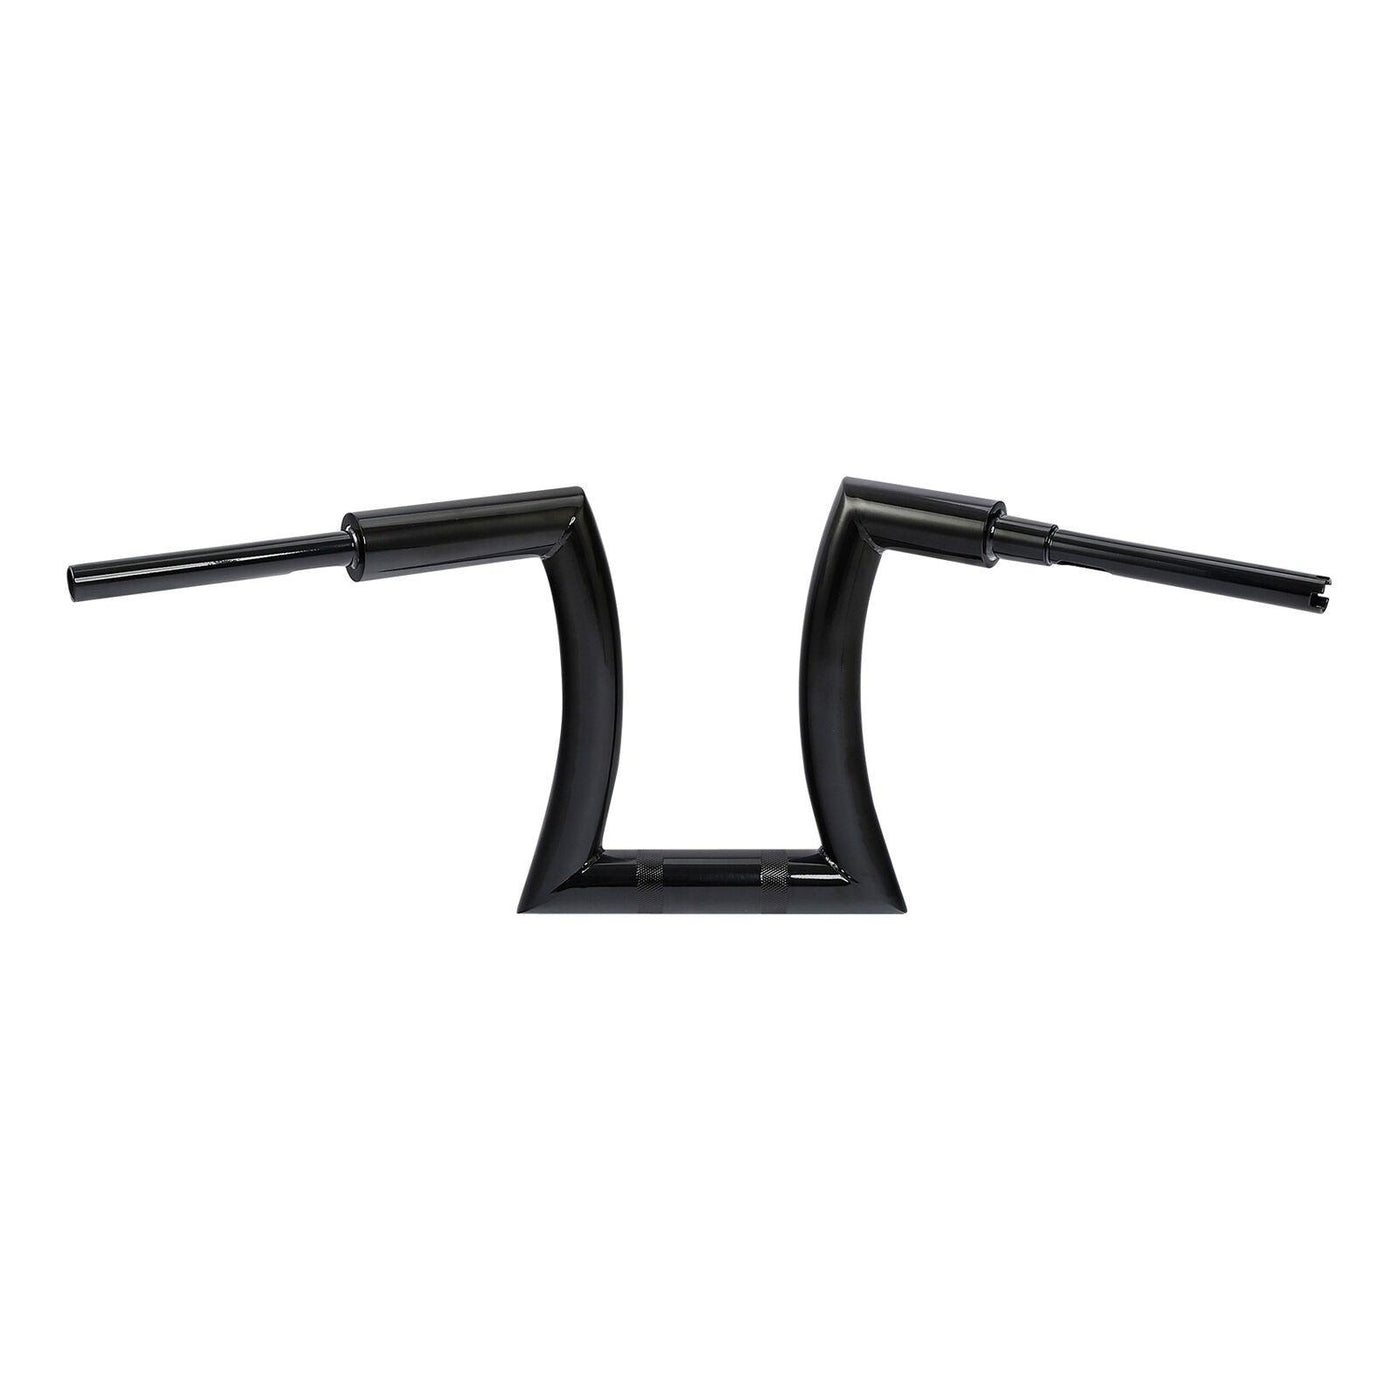 14" Rise 2'' Hanger Bar Handlebar Fit For Harley Softail Road King Sportster XL - Moto Life Products